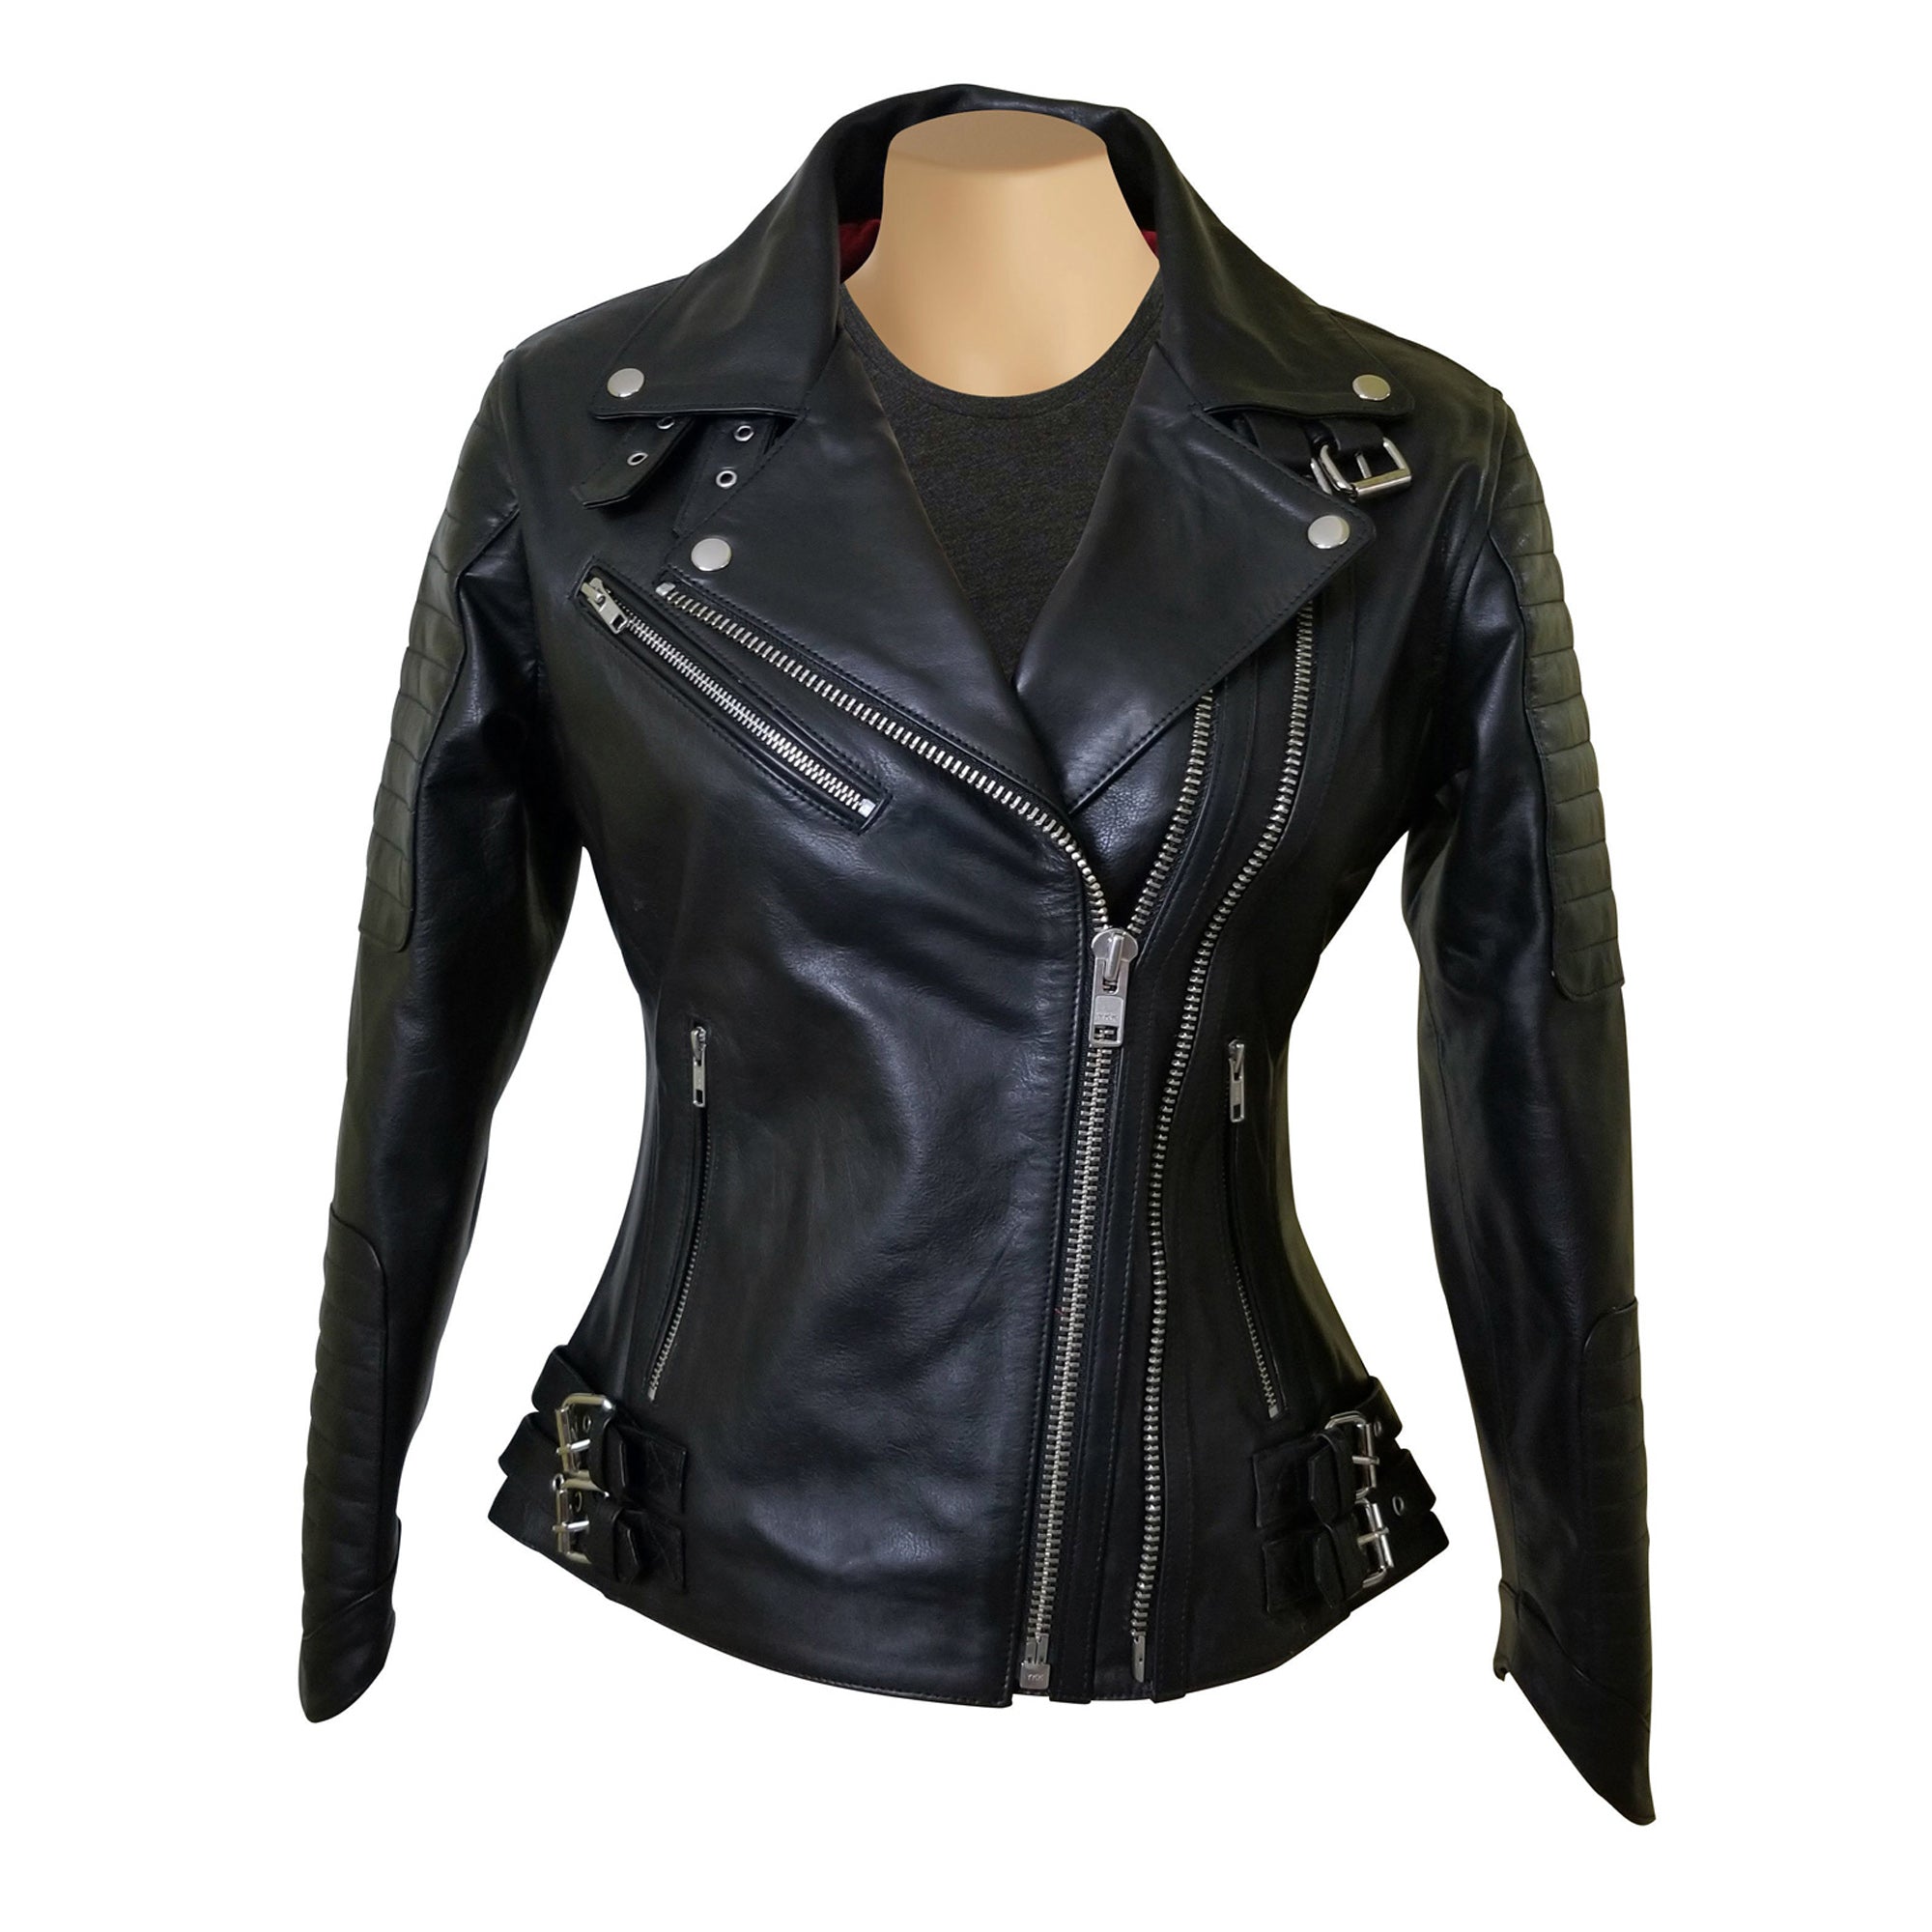 Miyah's double zipper leather jacket with ribbed stitching details ...